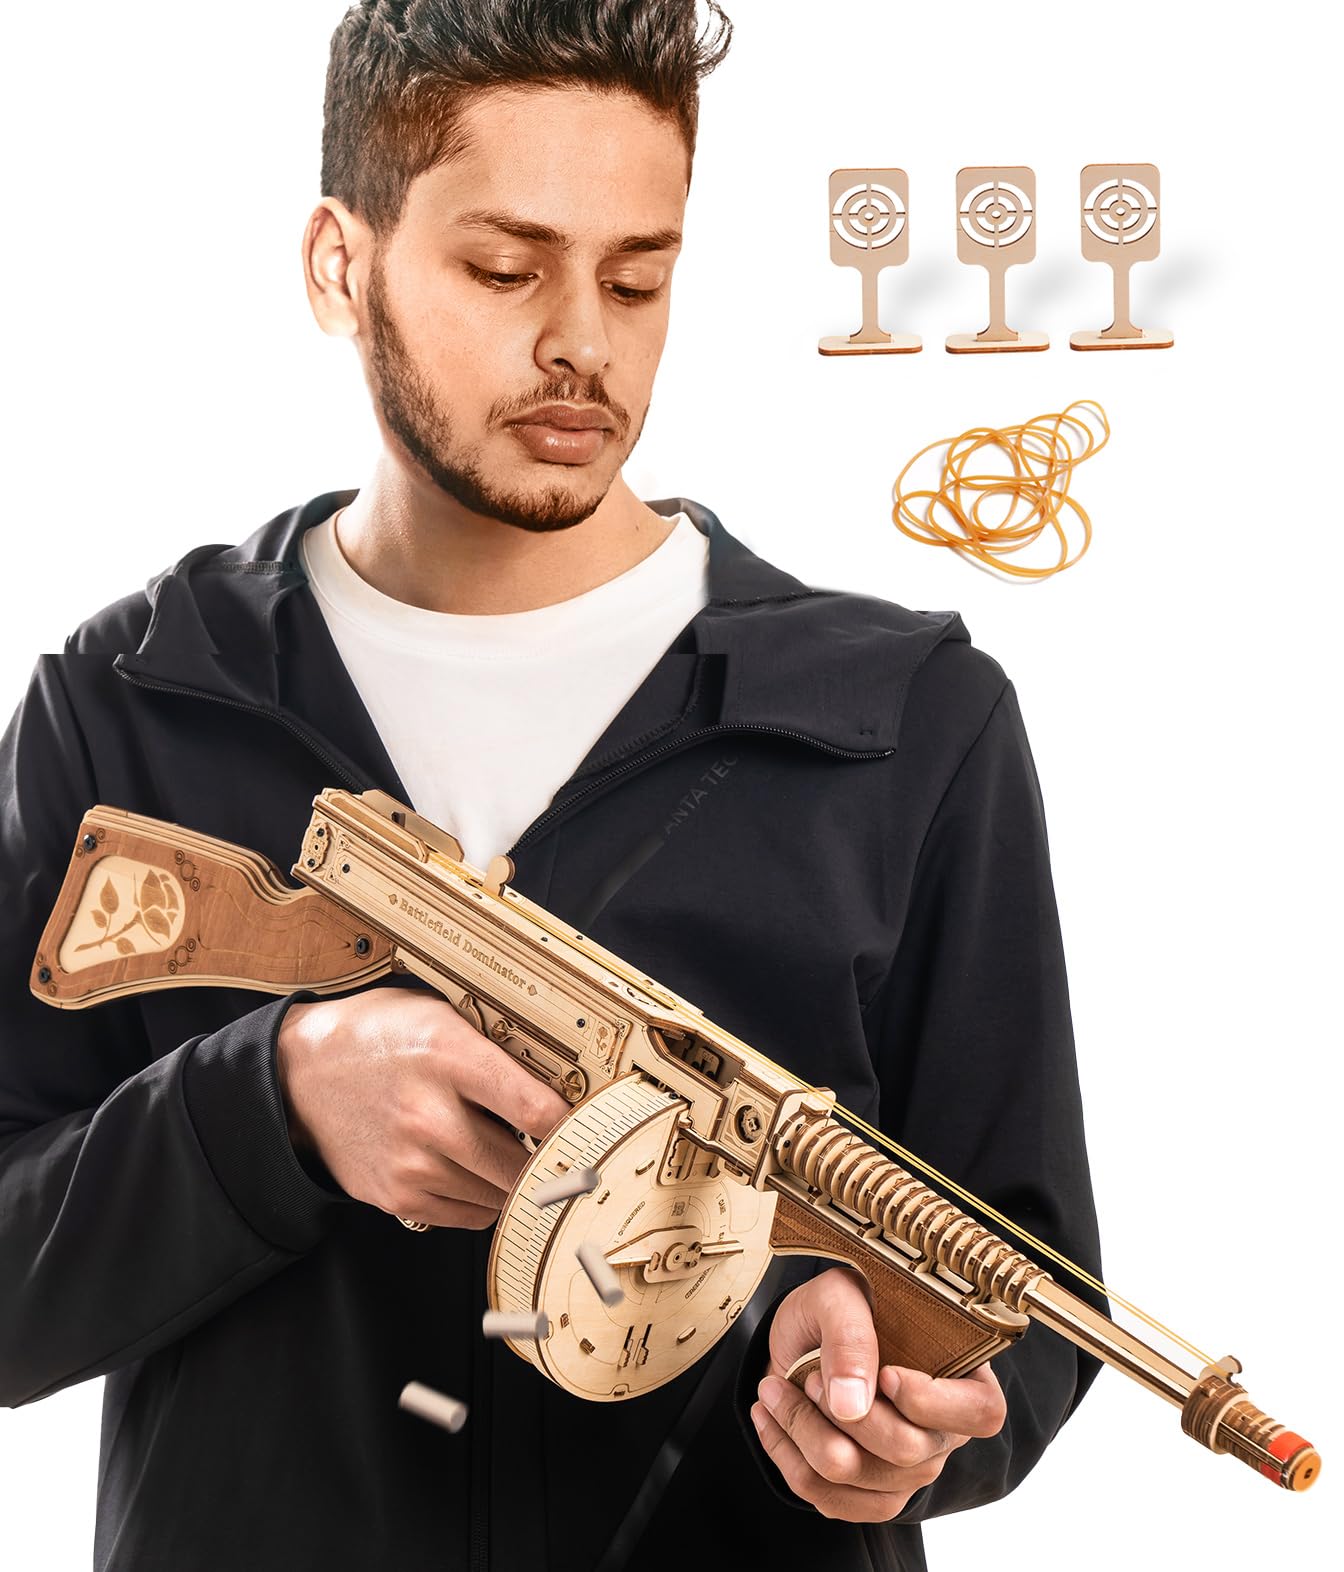 ROKR 3D Wooden Puzzles for Adults-Rubber Band Toy Tommy Gun-Model Kits to Build for Adults-Wood Puzzles Adult-Hobbies for Men